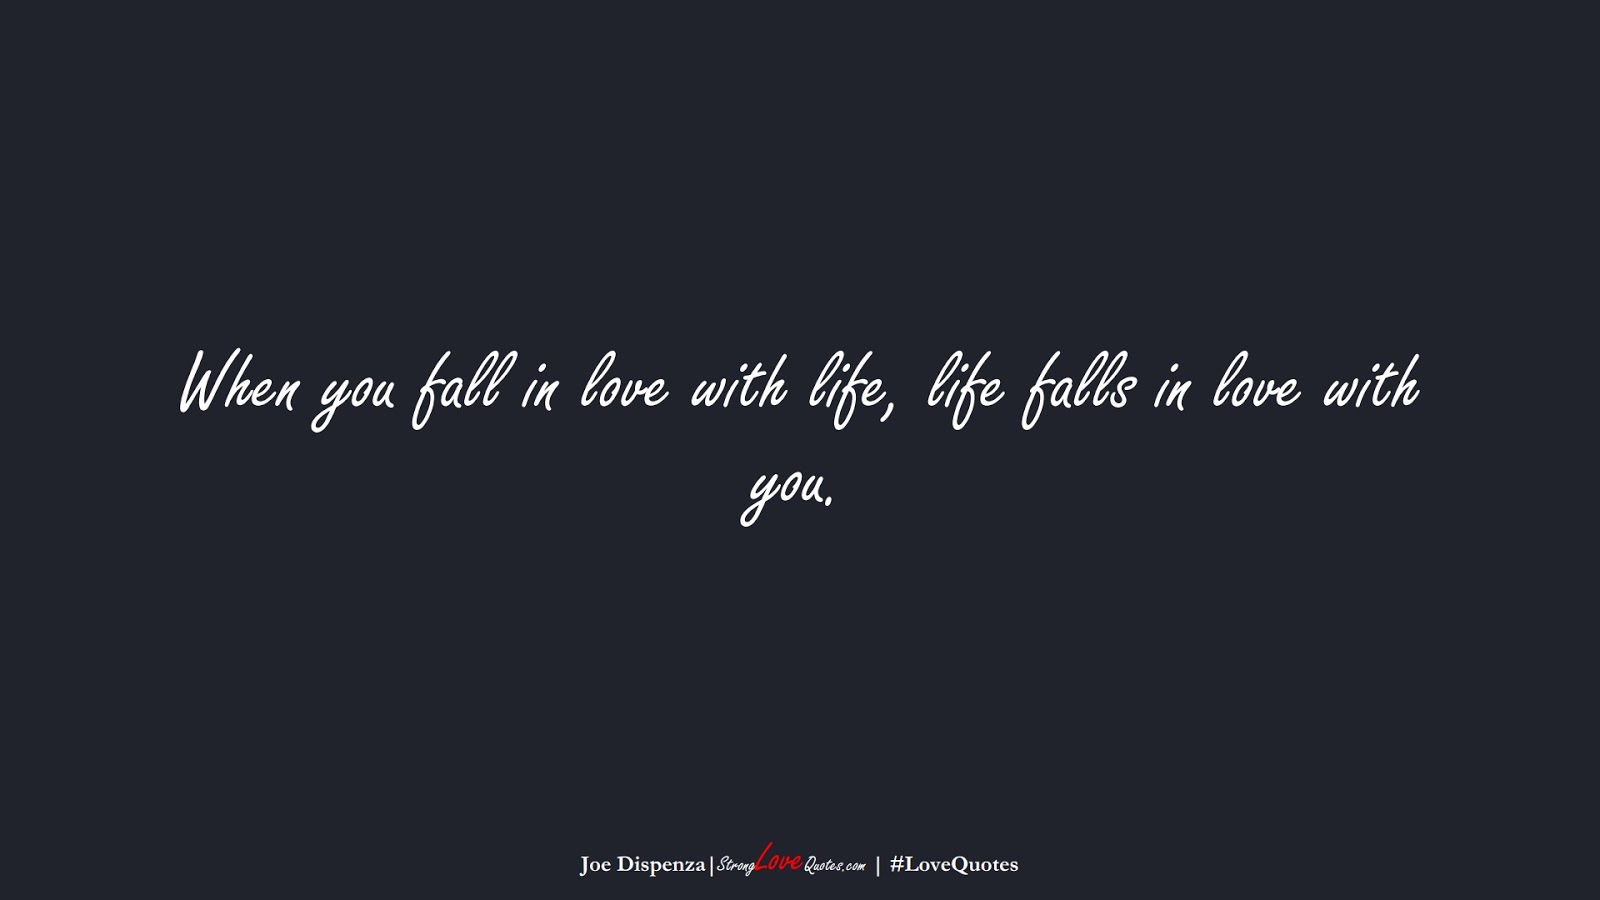 When you fall in love with life, life falls in love with you. (Joe Dispenza);  #LoveQuotes